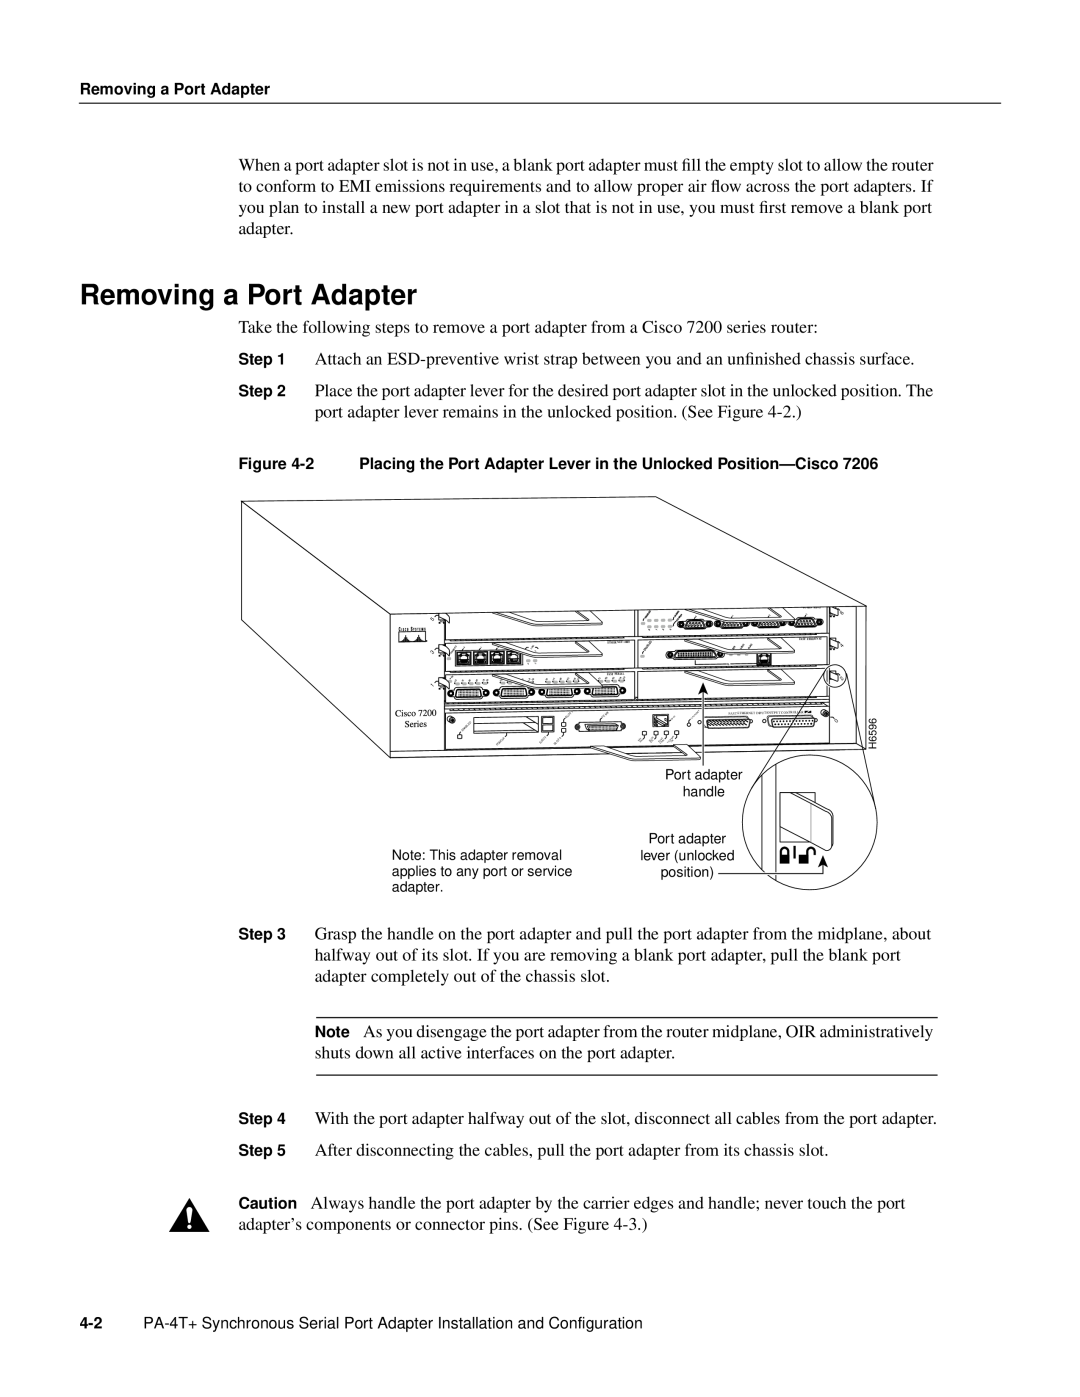 Cisco Systems PA-4T manual Removing a Port Adapter, handle, Port adapter lever unlocked position, H6596 